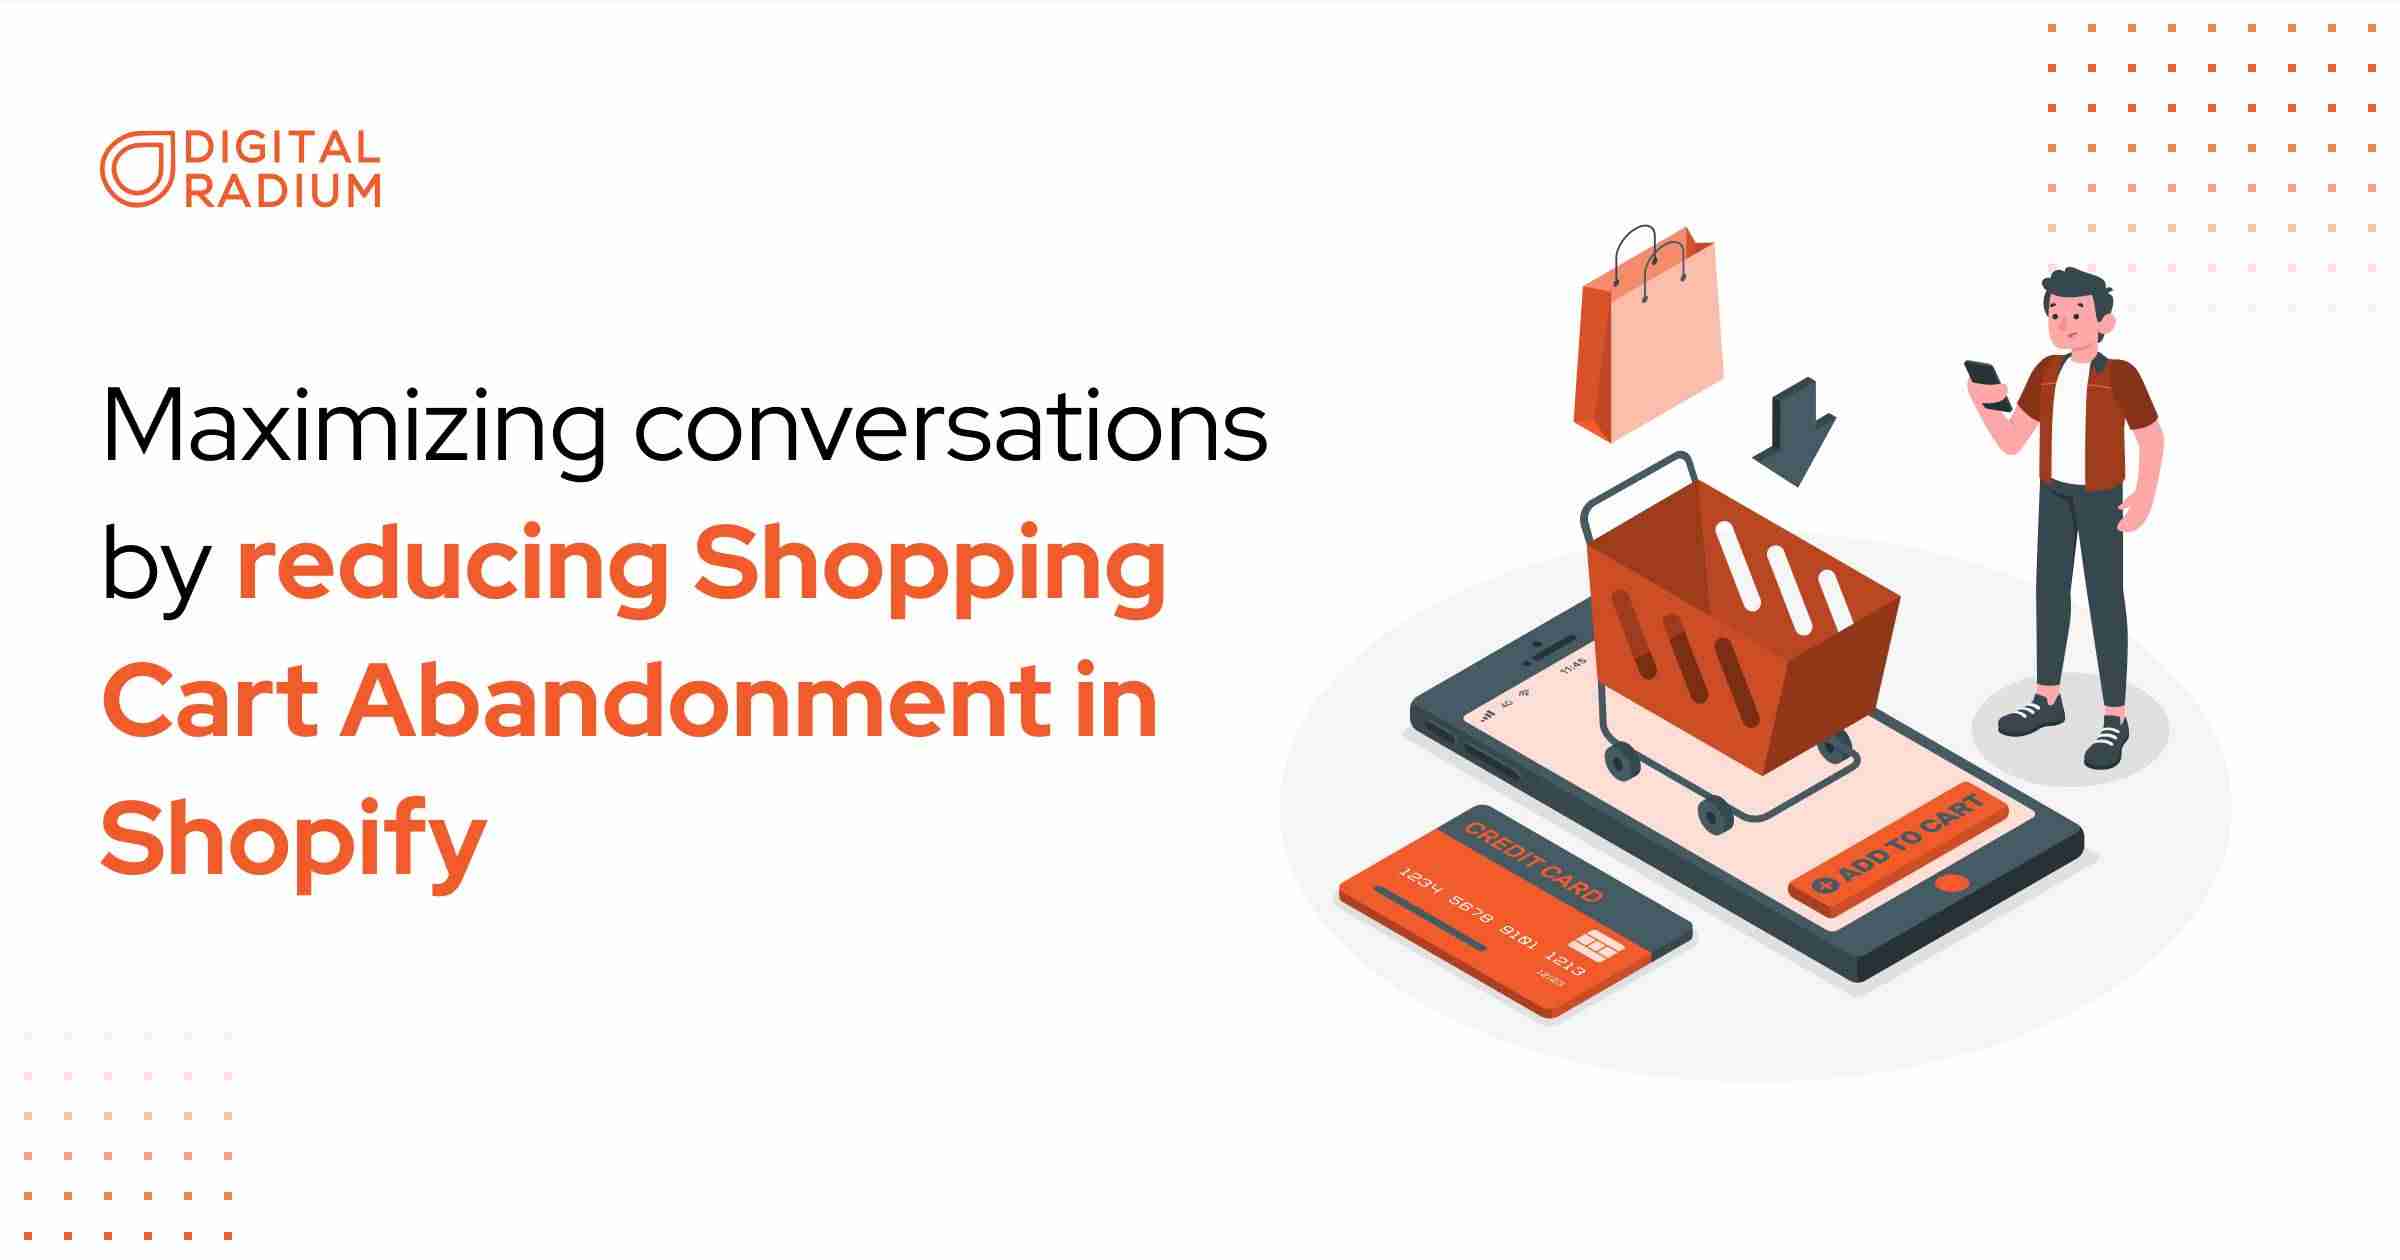 How to Reduce Cart Abandonment in Shopify?